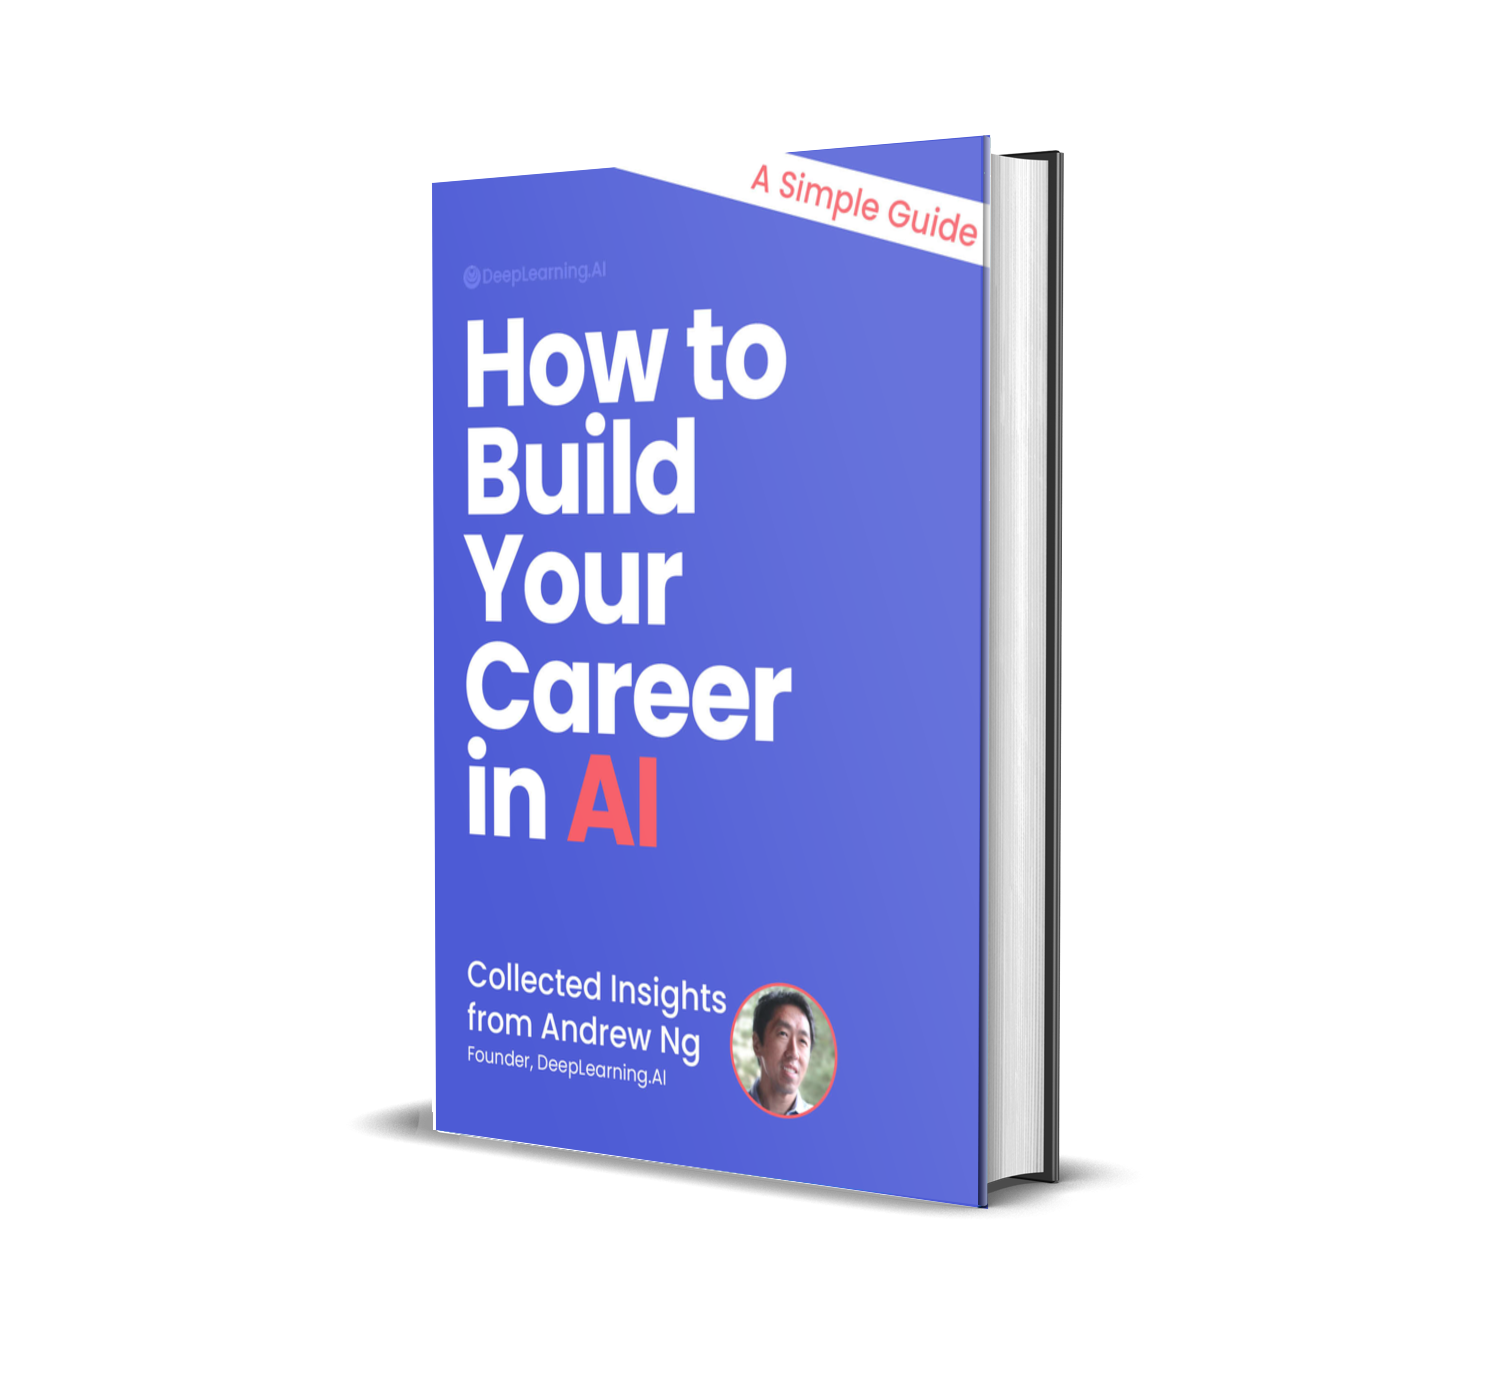 Build Your Career in AI - ebook cover